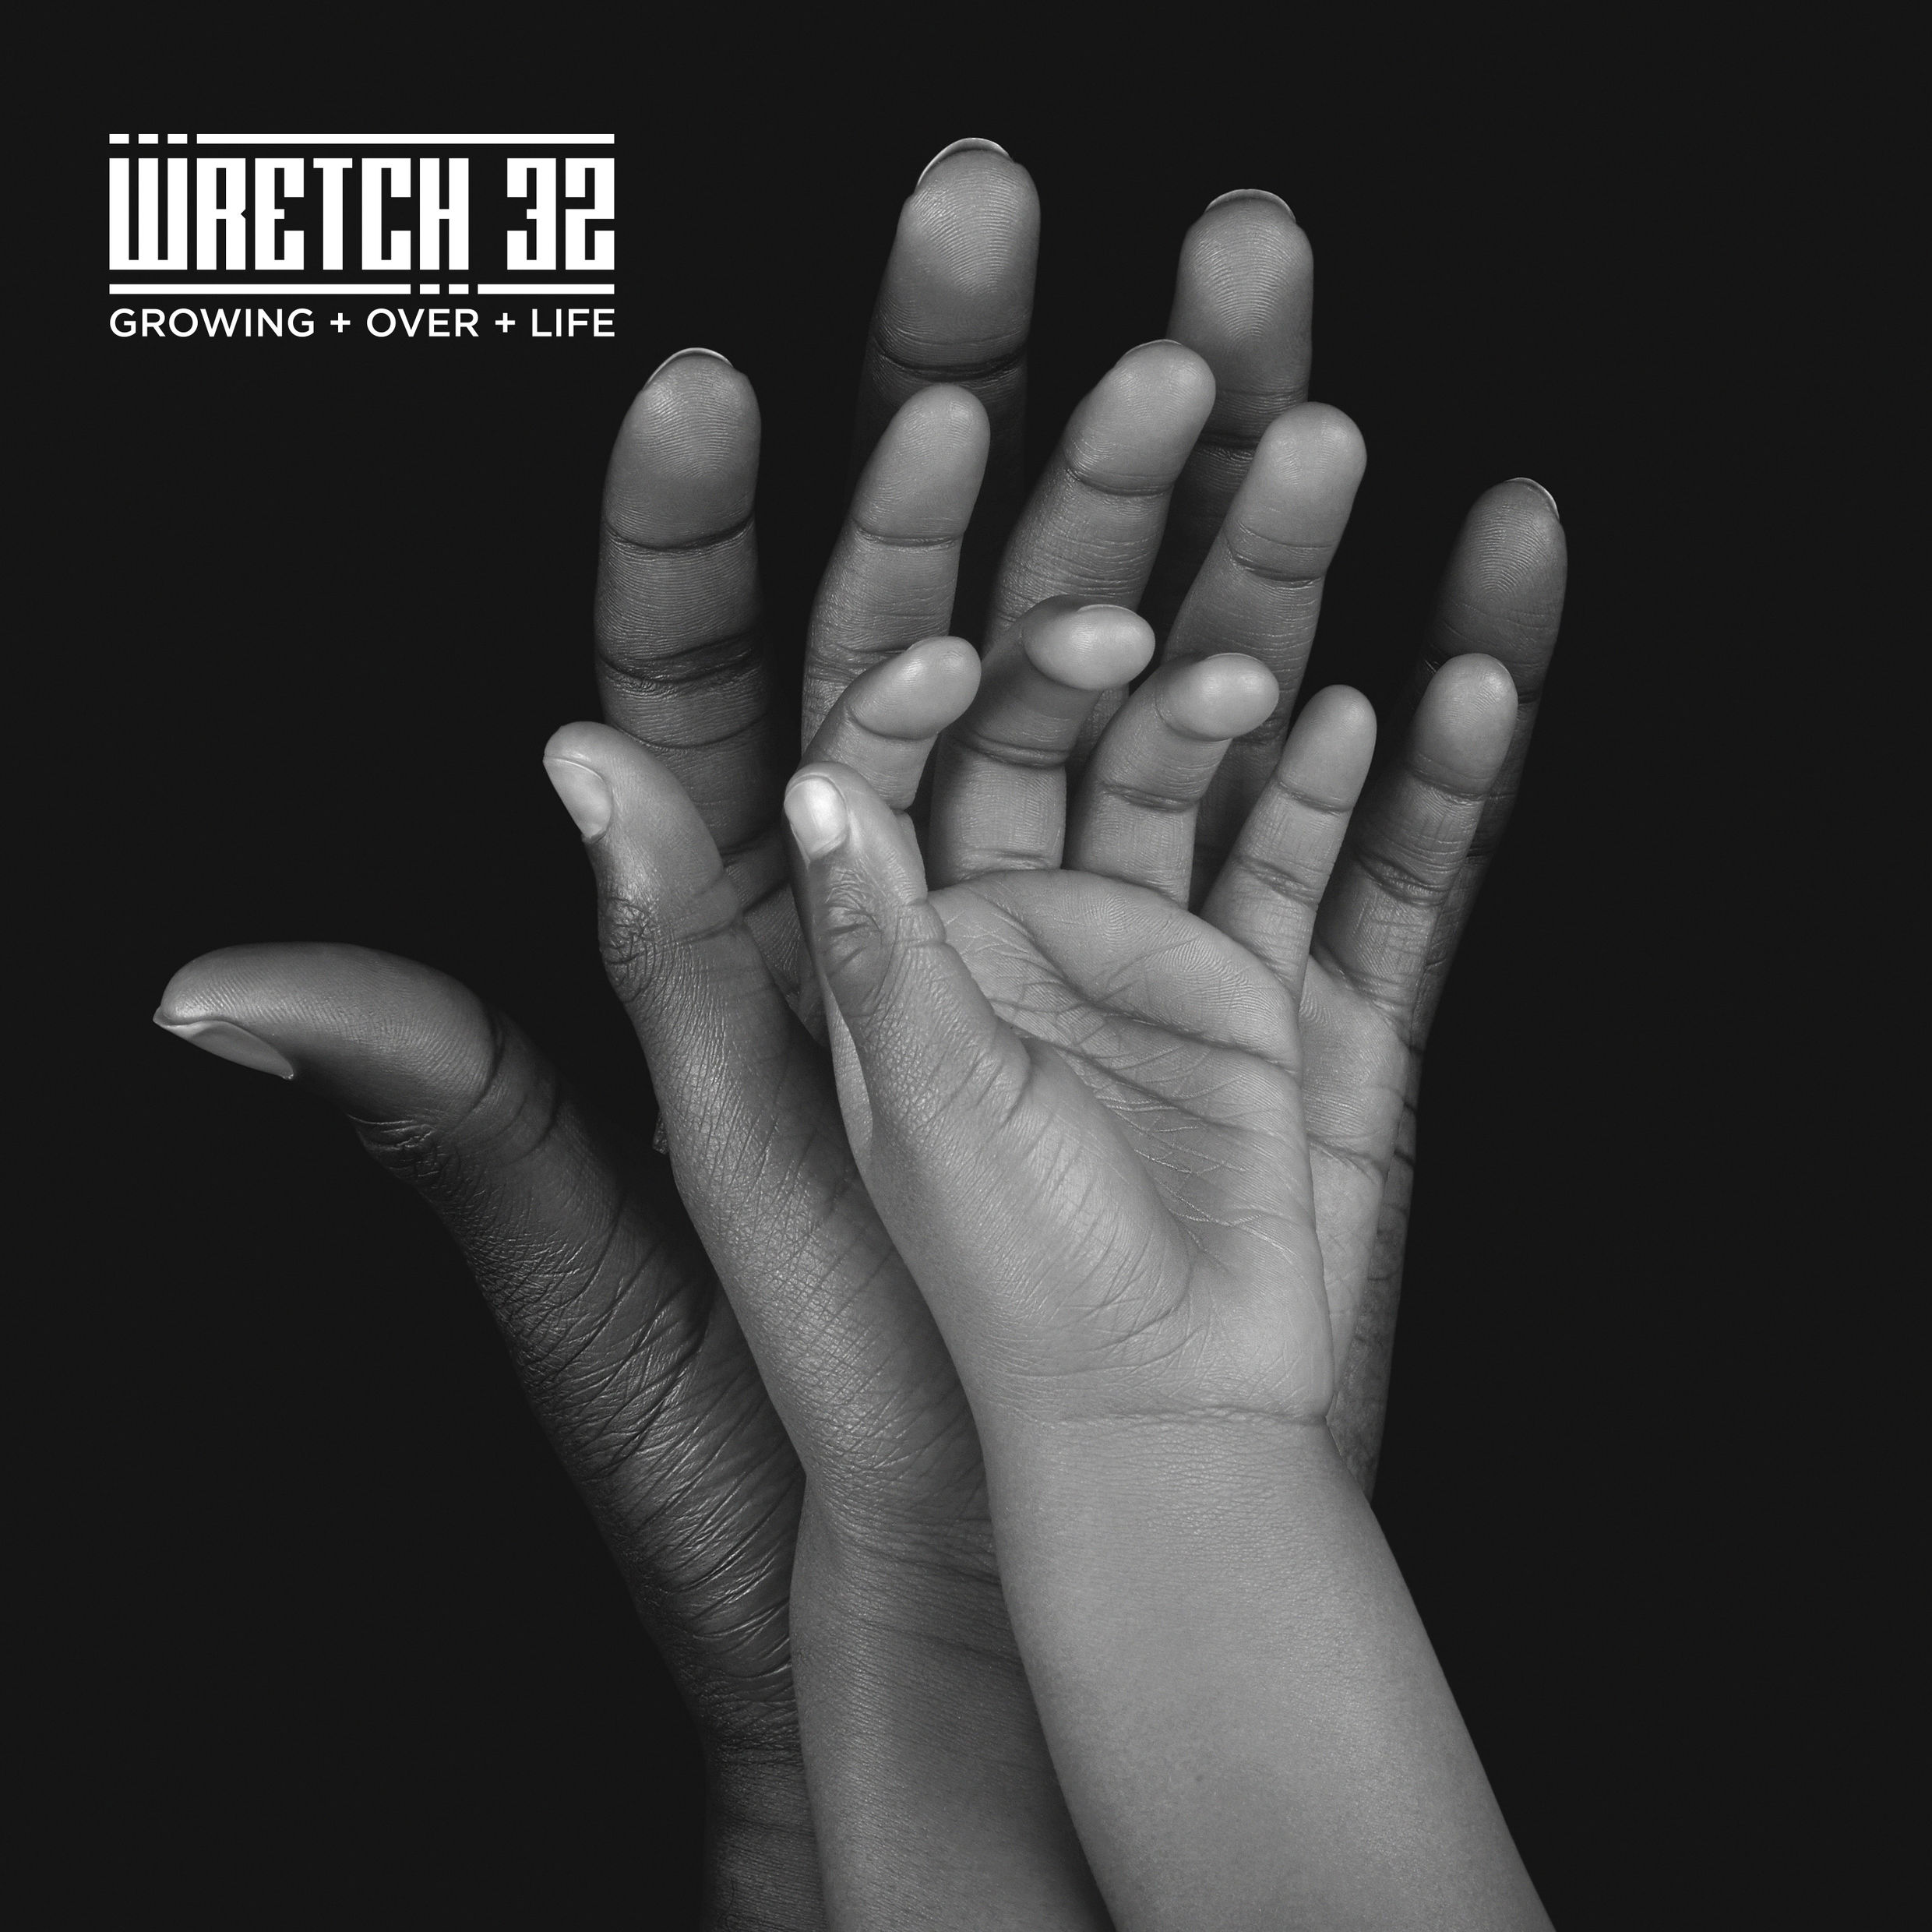 wretch-32-growing-over-life-2016